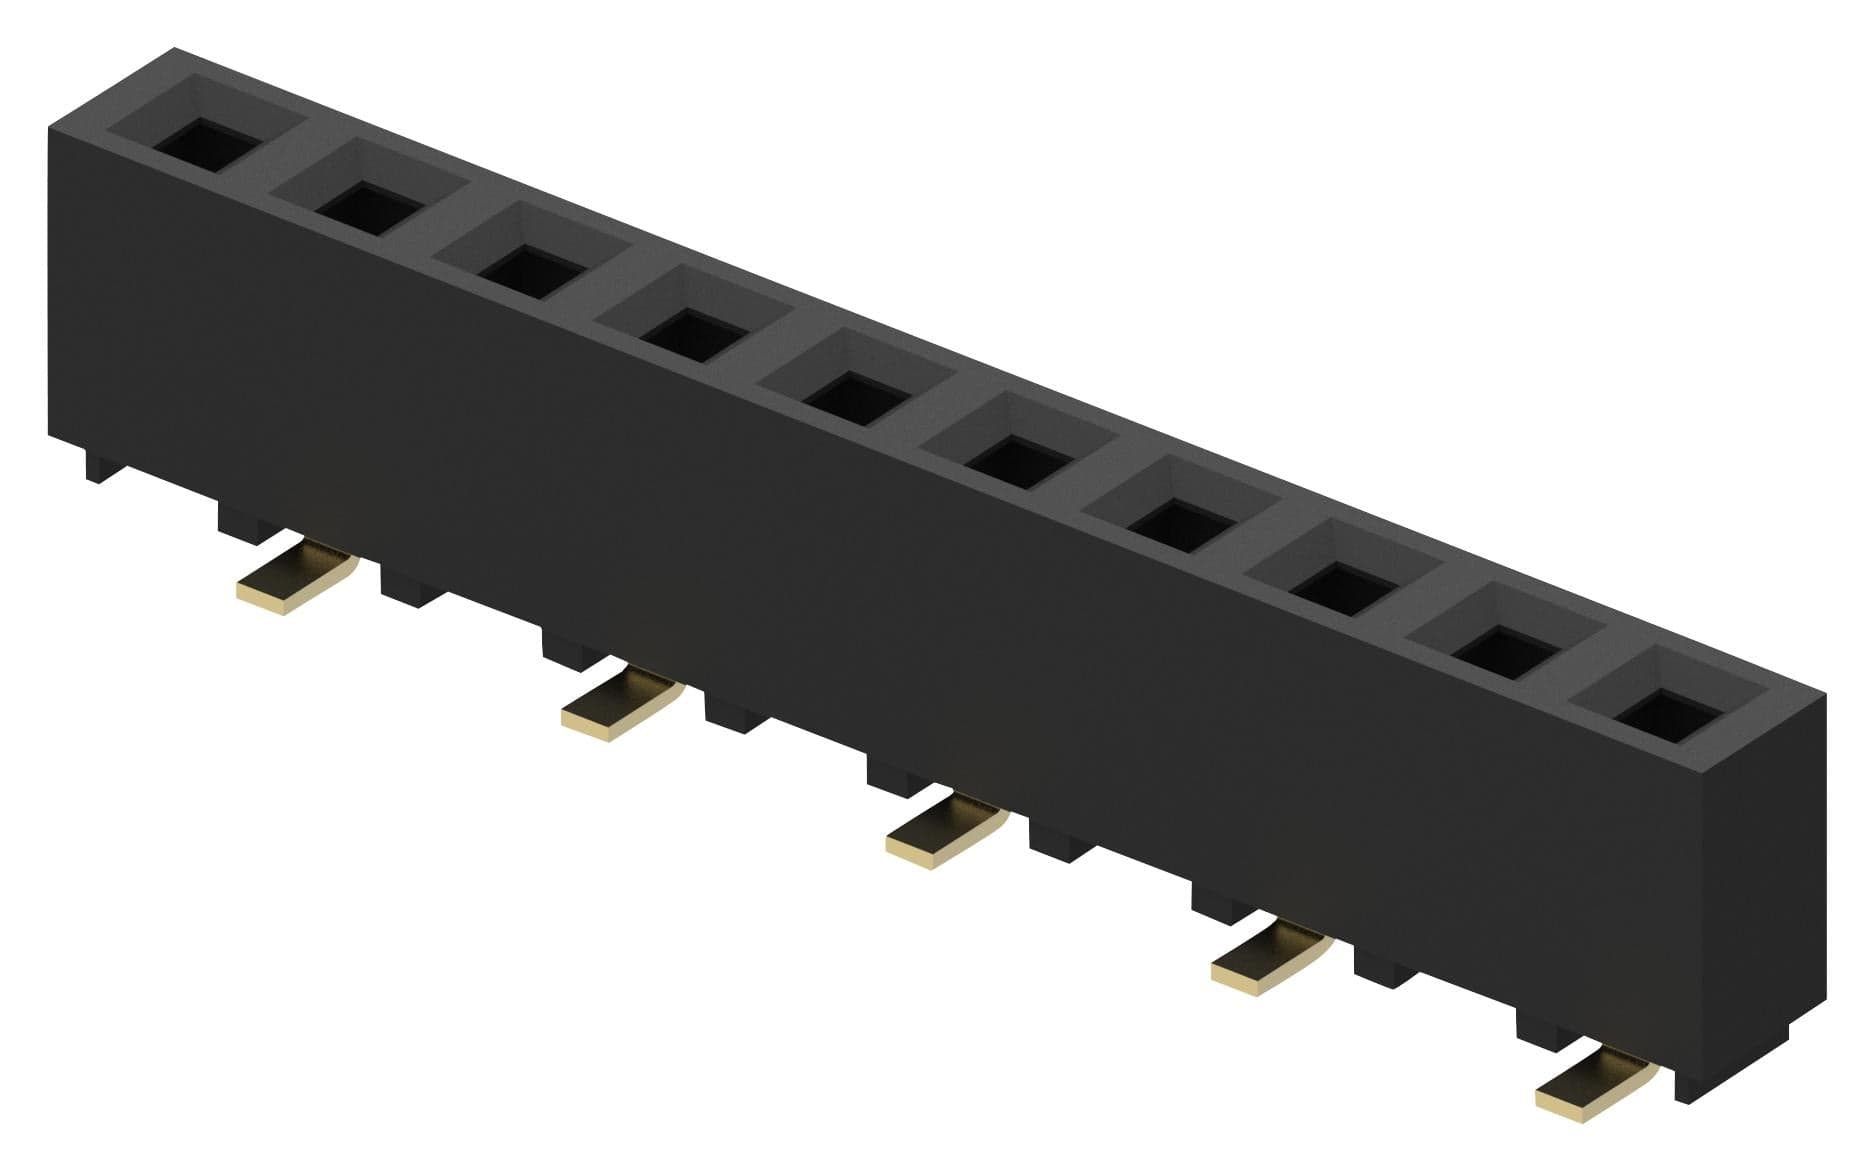 GCT (GLOBAL CONNECTOR TECHNOLOGY) Board-to-Board BG125-04-A-1-1-0440-N-D CONNECTOR, RCPT, 4POS, 1ROW, 2.54MM GCT (GLOBAL CONNECTOR TECHNOLOGY) 2577327 BG125-04-A-1-1-0440-N-D